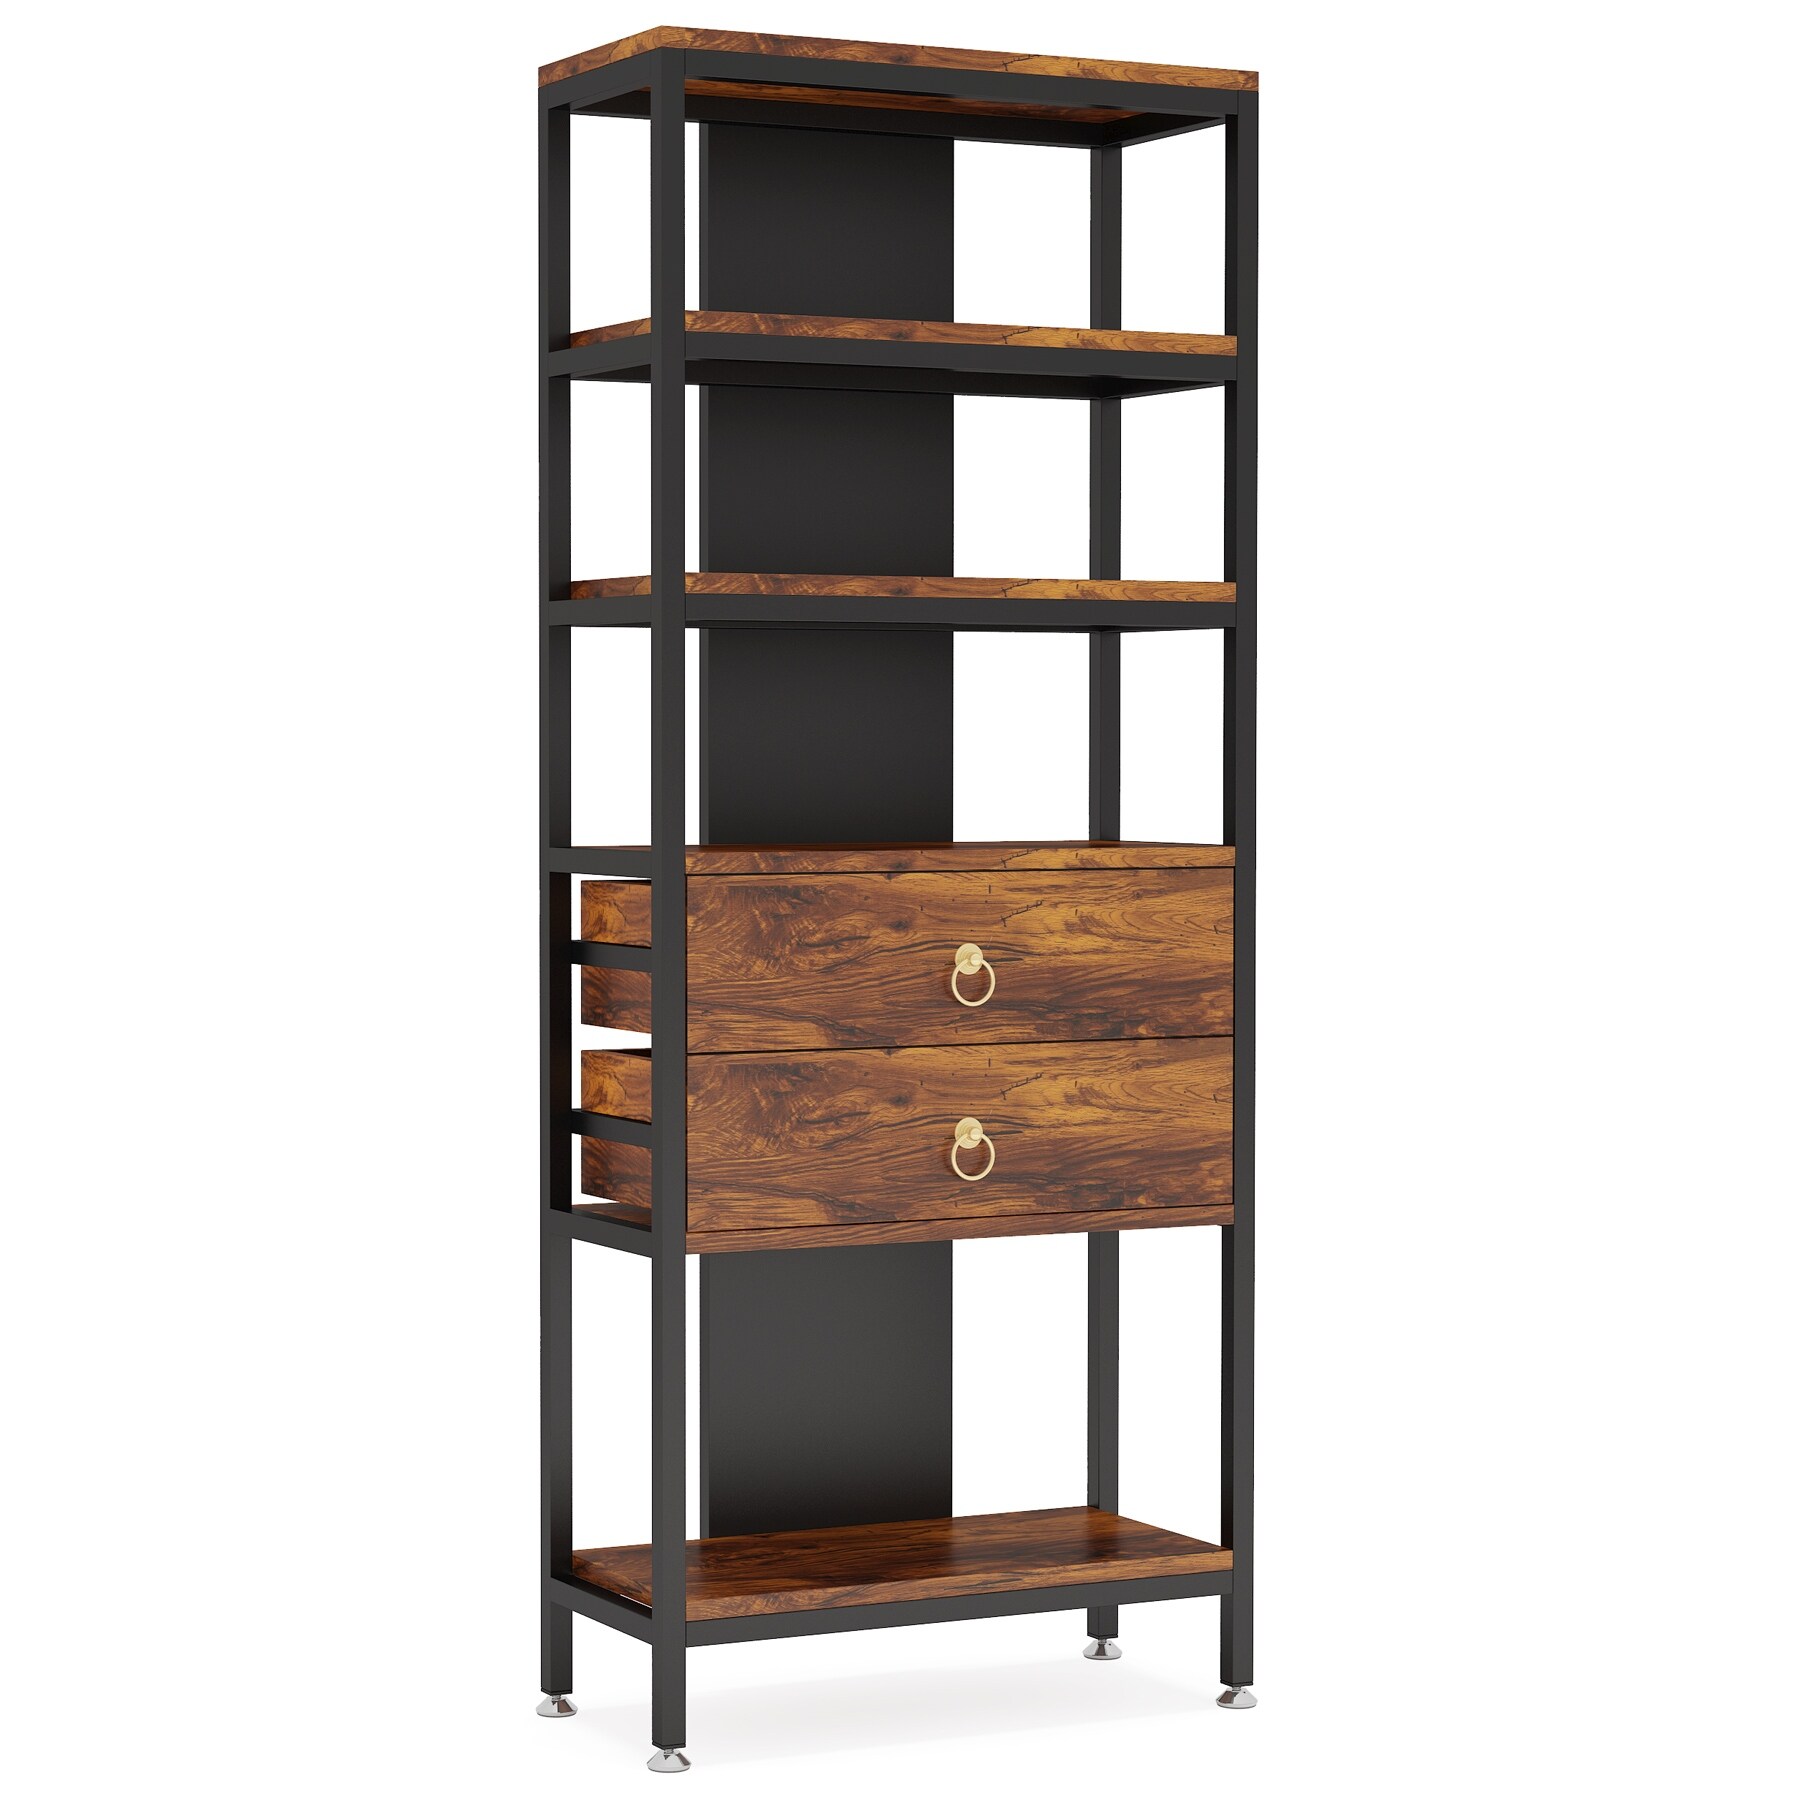 https://ak1.ostkcdn.com/images/products/is/images/direct/aa635b30726919b4eeb7efbe0ae7104b0c58c75a/Industrial-5-Tiler-Bookshelf-with-LED-Light-and-Drawers%2C-67.52%E2%80%99%E2%80%99-Tall-Bookcase-Open-Storage-Shelves-Display-Shelf.jpg